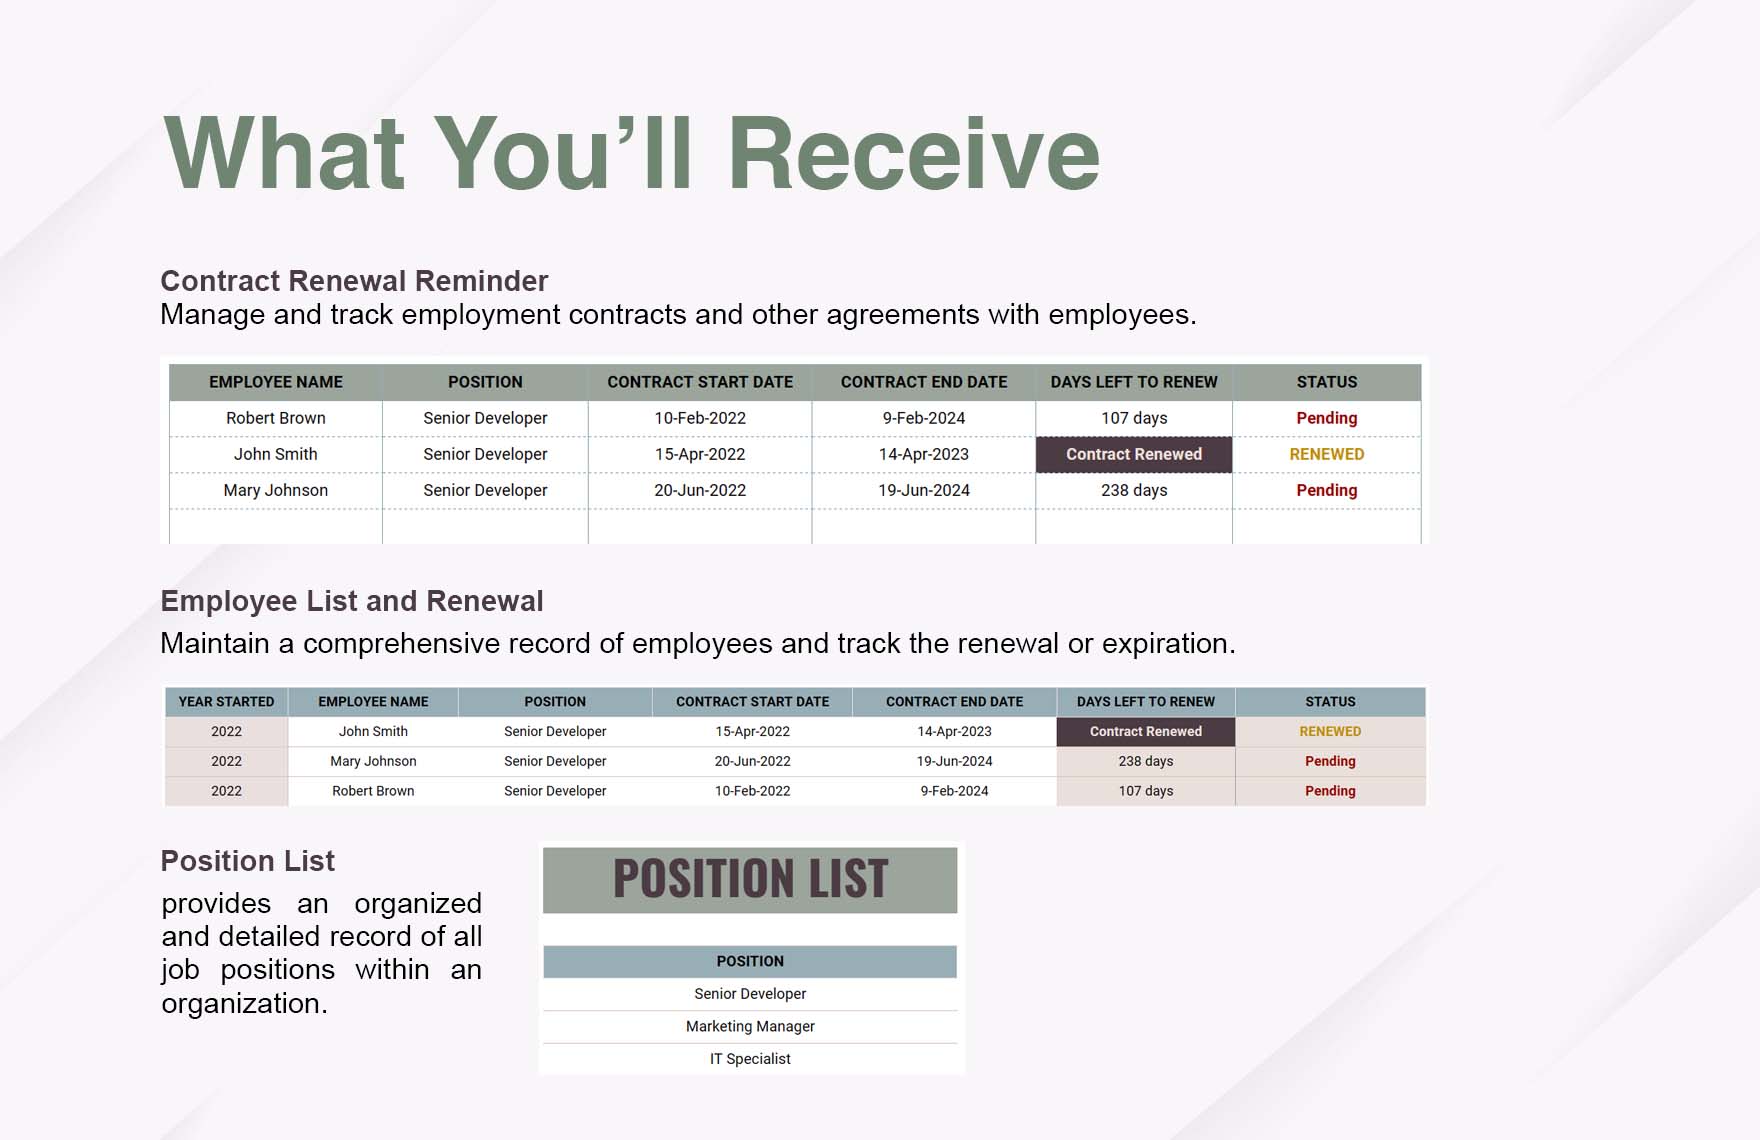 Contract Renewal Reminder Tool HR Template